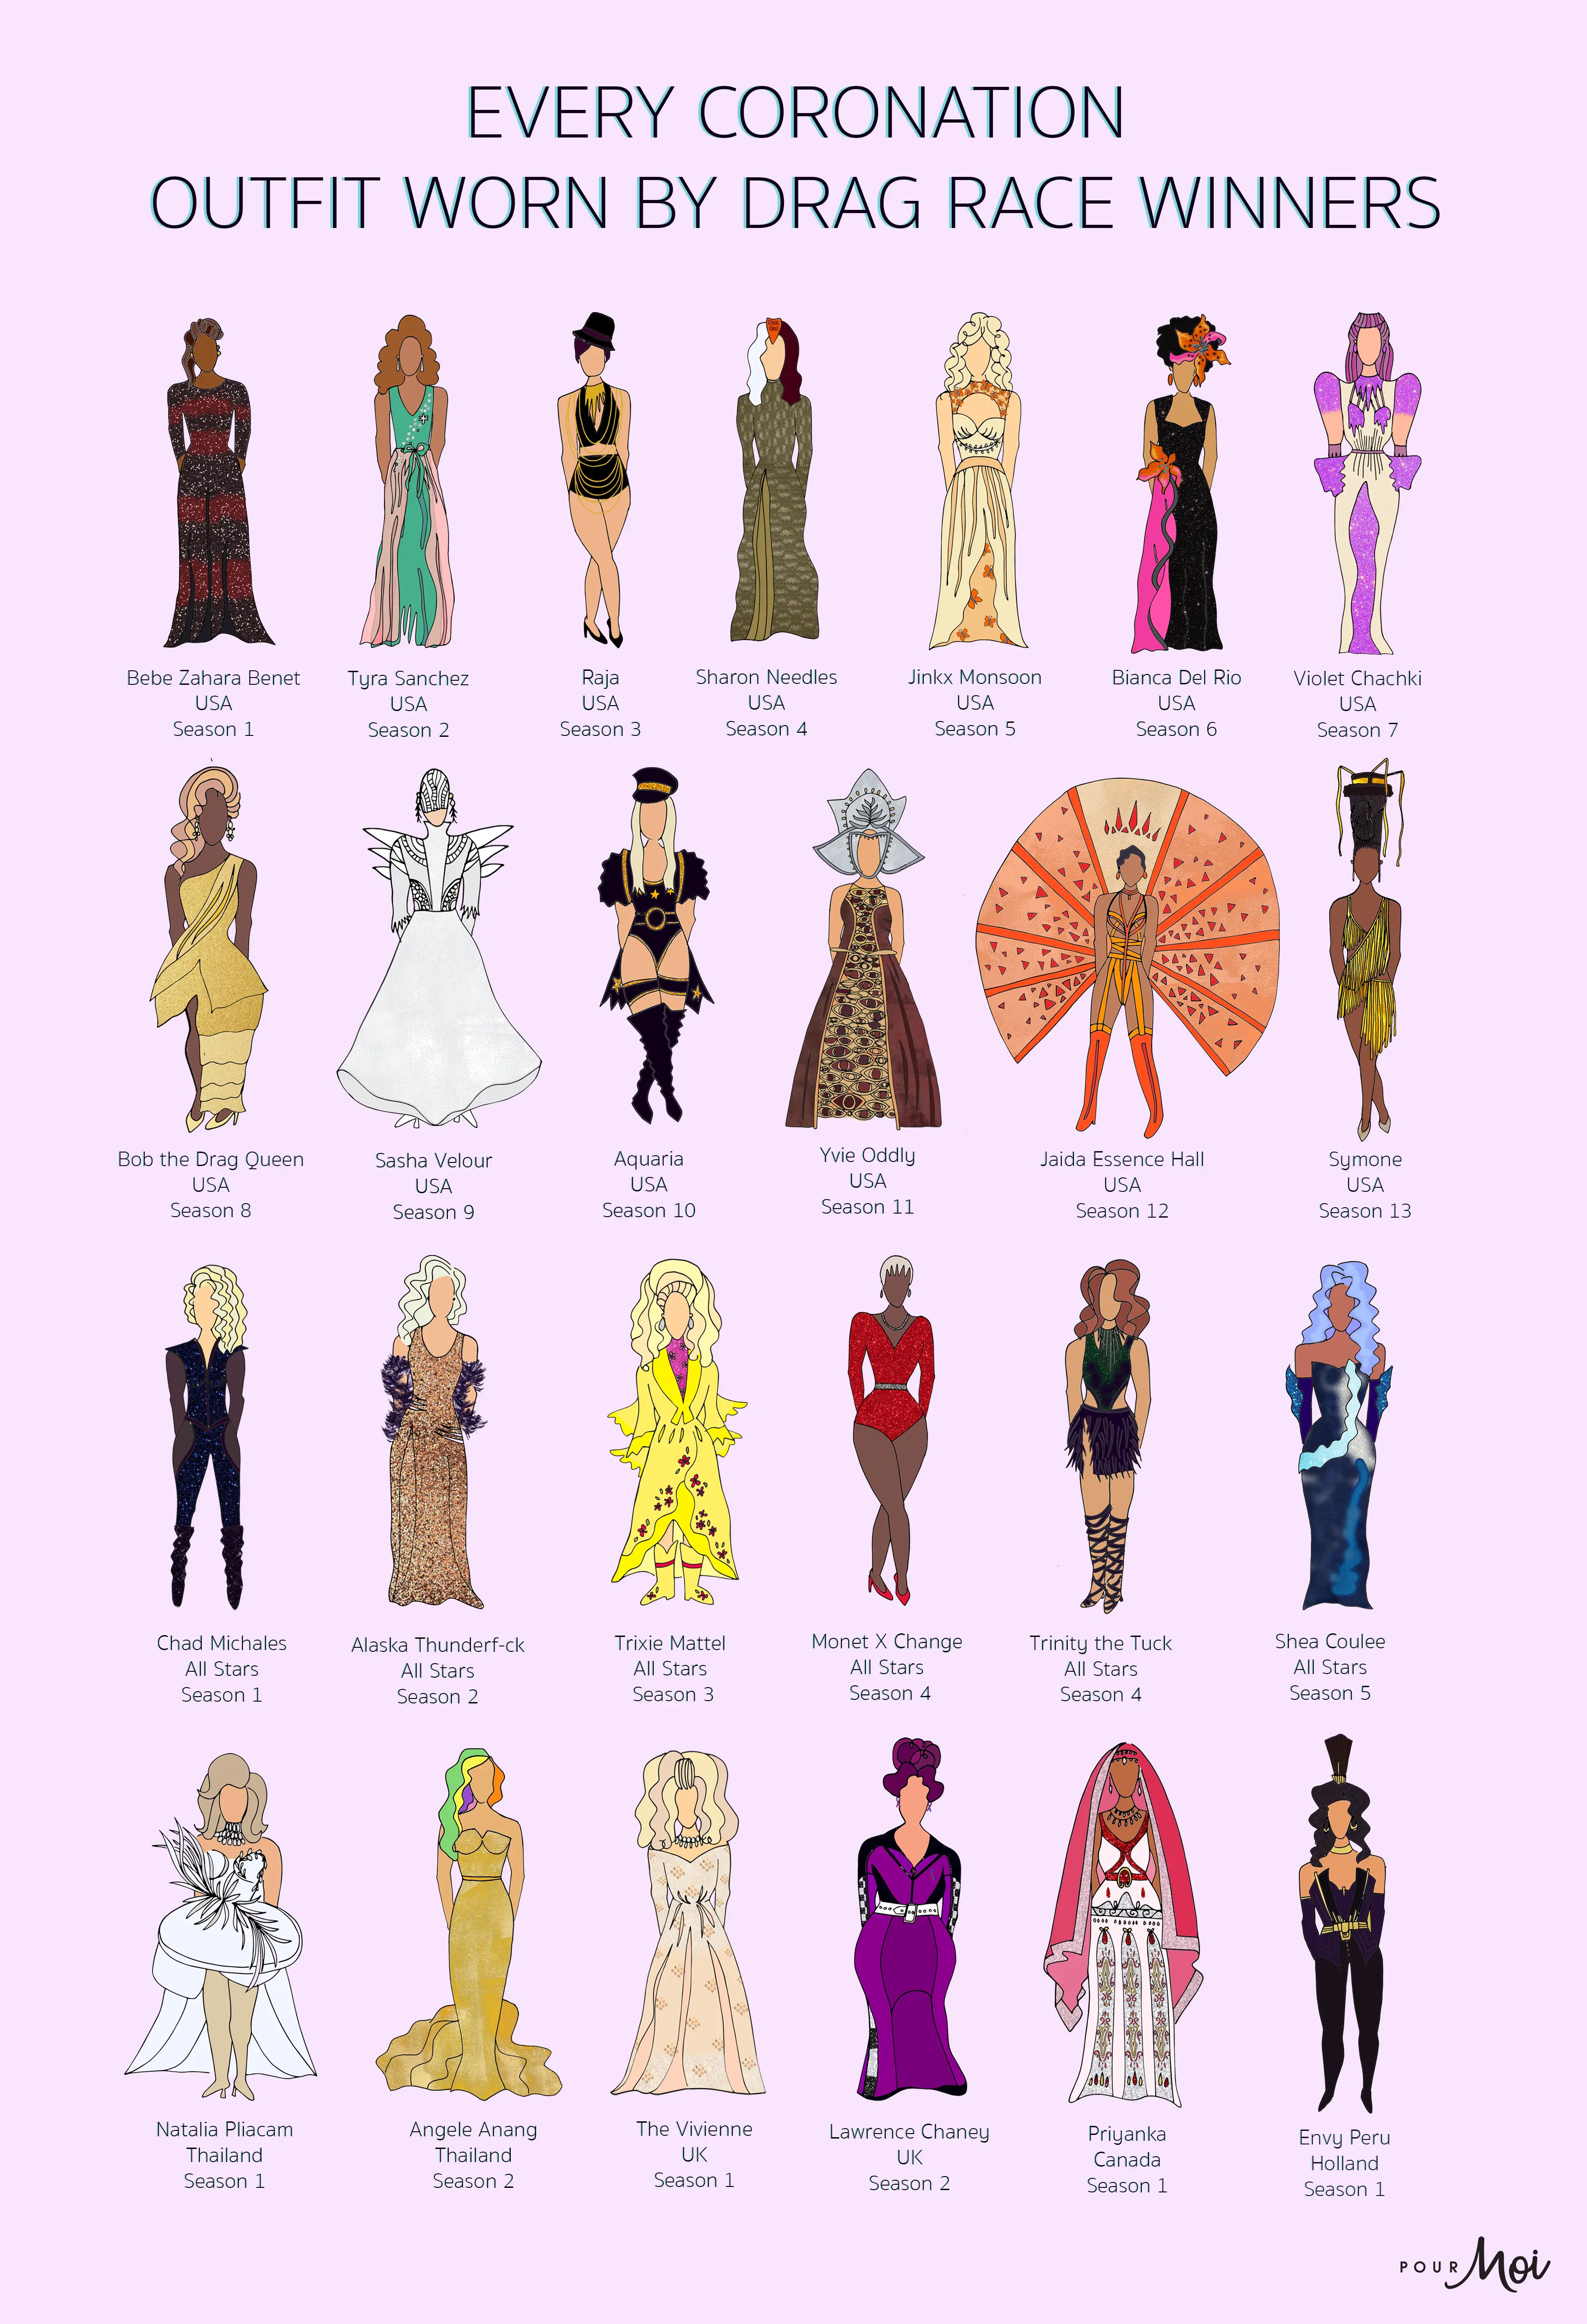 Every Drag Race Winner's Outfit